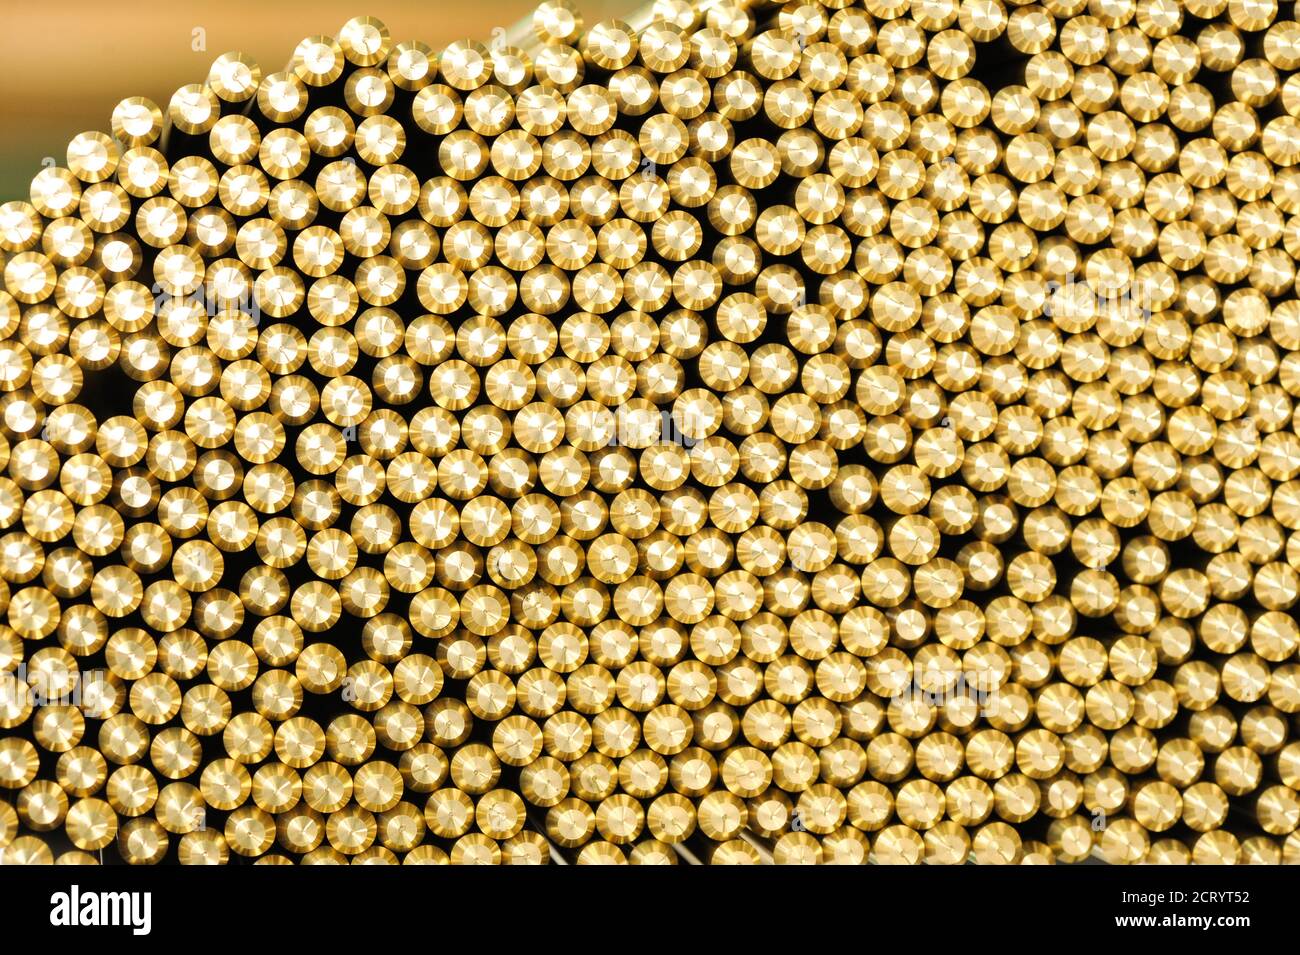 Background texture of the machined ends of brass rods packed tightly together in a warehouse or factory in a full frame view Stock Photo